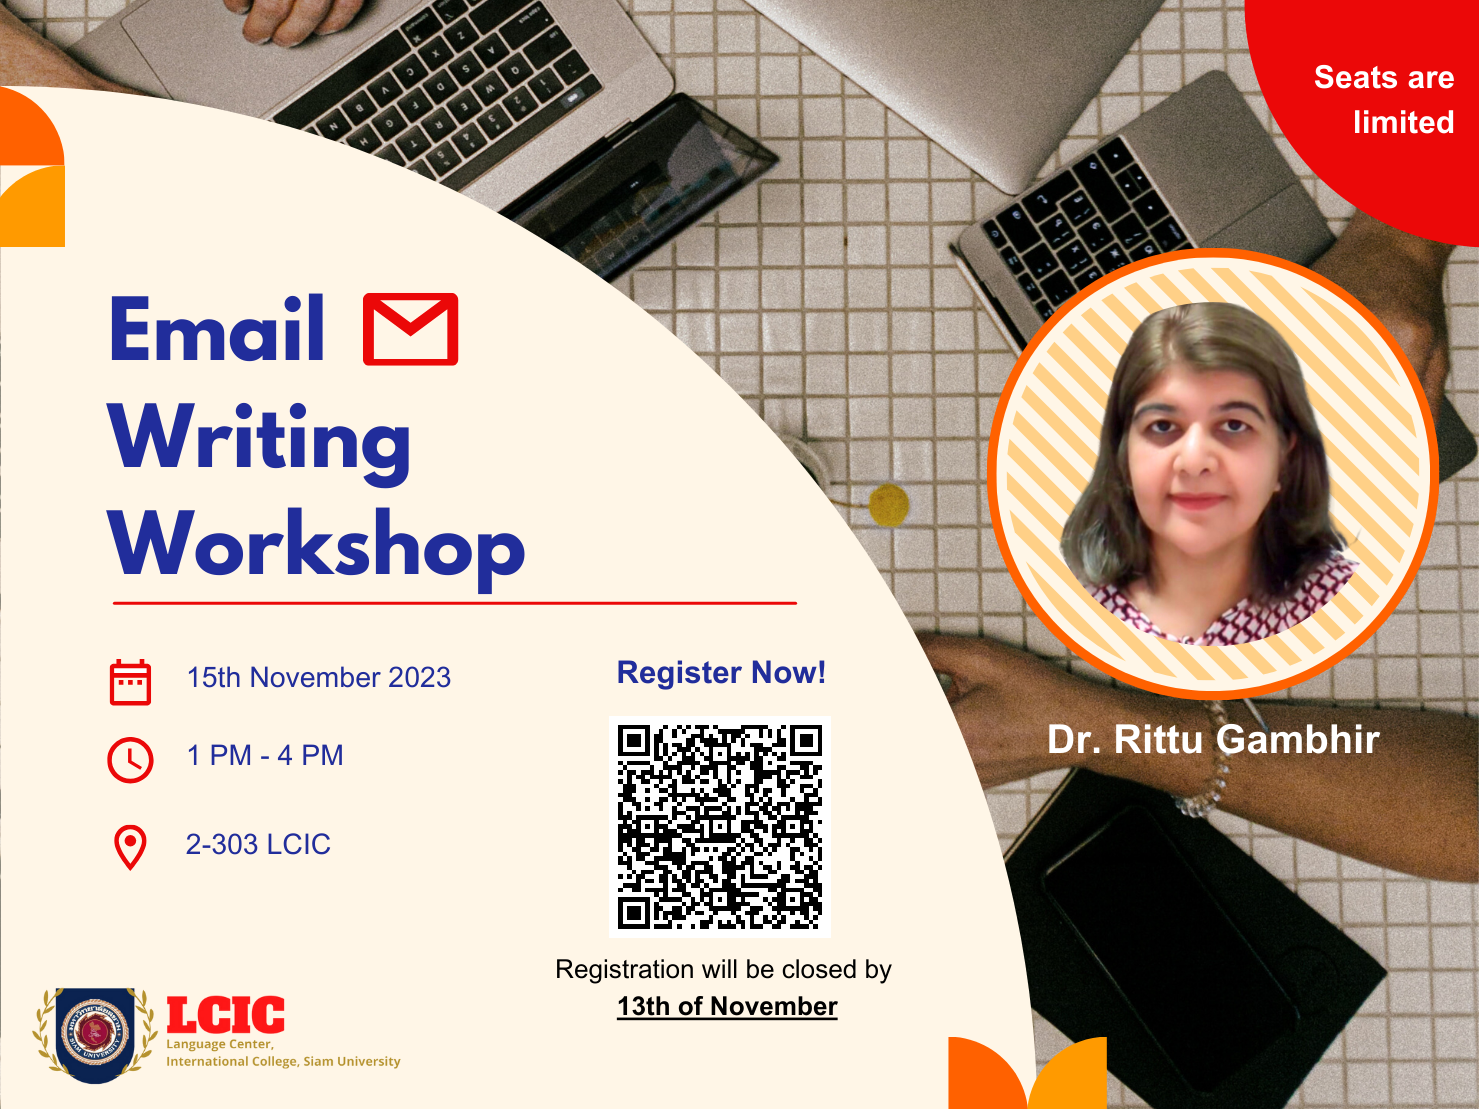 Email Writing Workshop